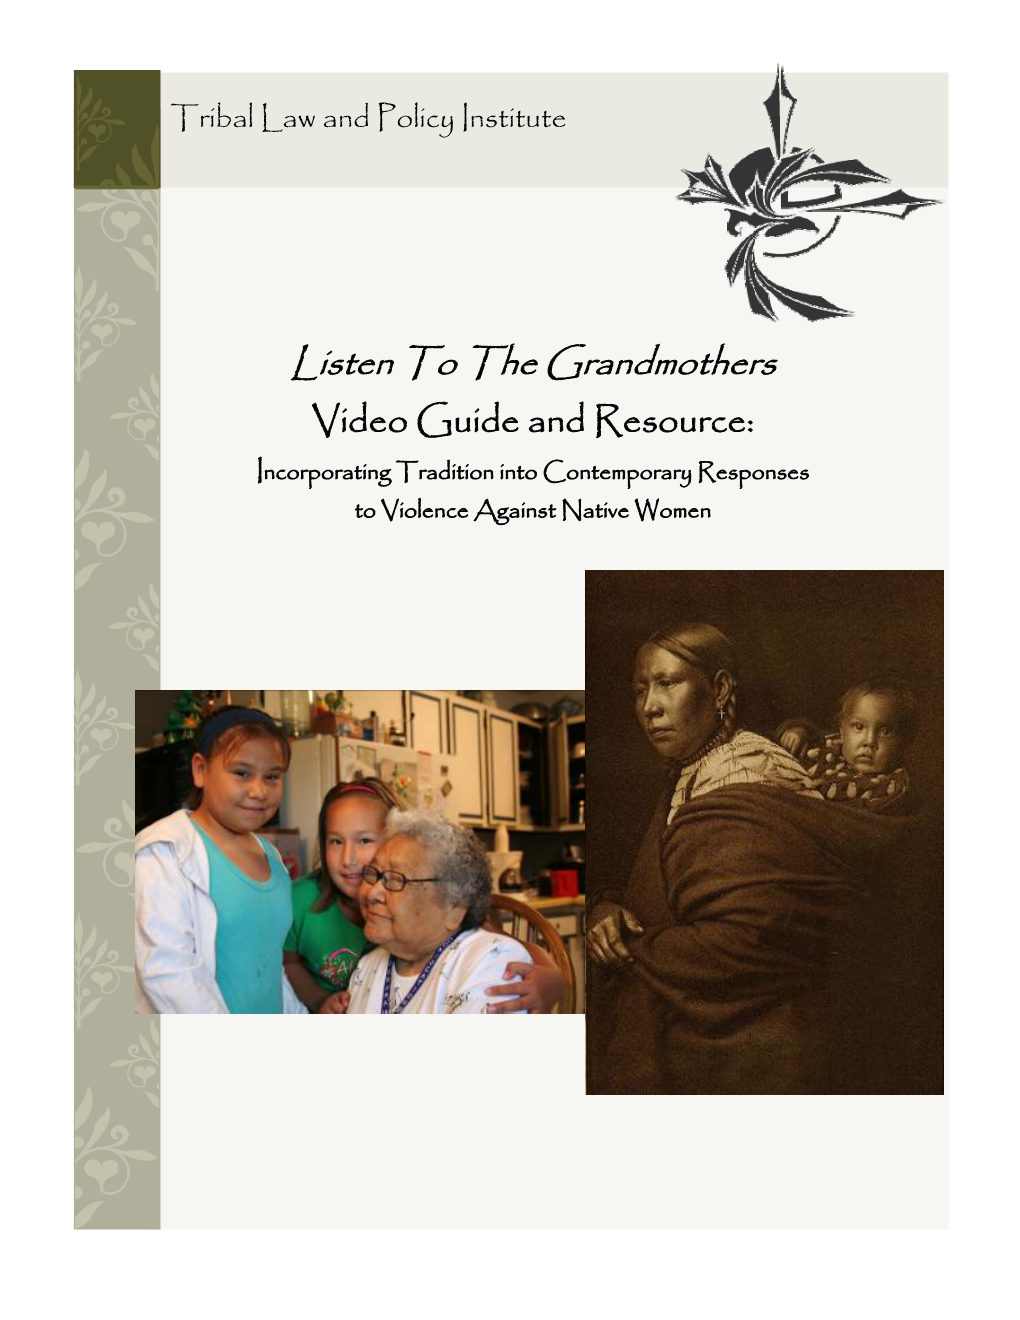 Listen to the Grandmothers Video Guide and Resource: Incorporating Tradition Into Contemporary Responses to Violence Against Native Women